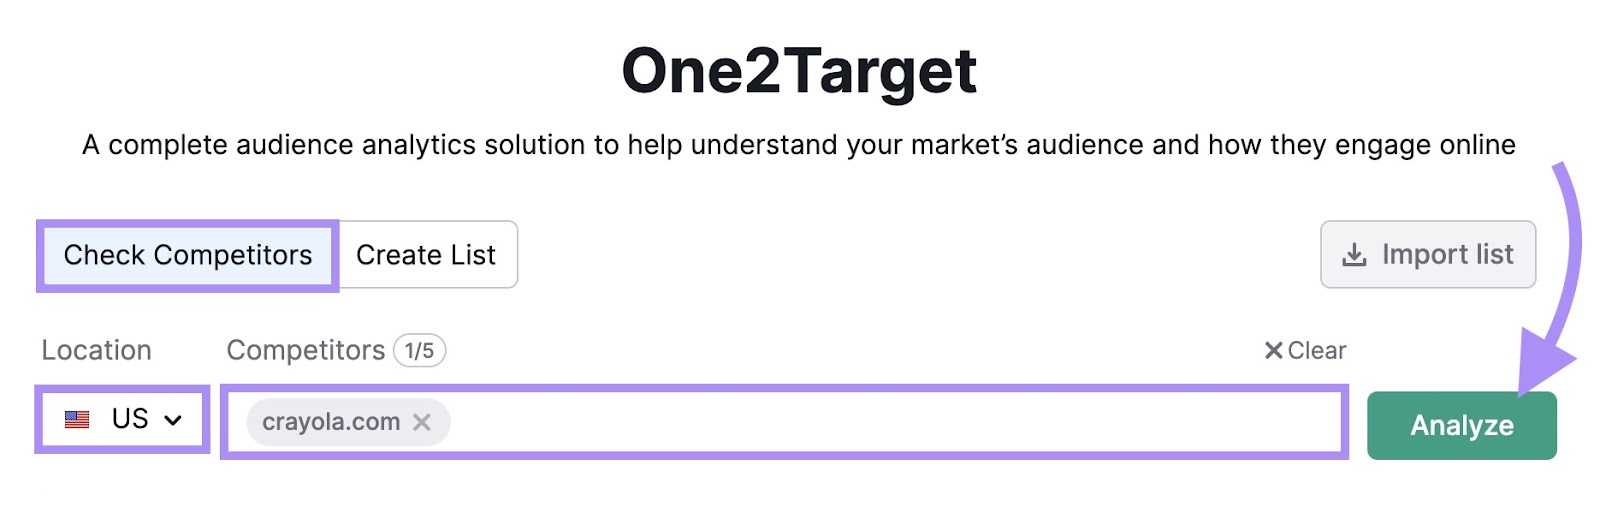 "crayola.com" entered in the "Competitors" text box in One2Target tool